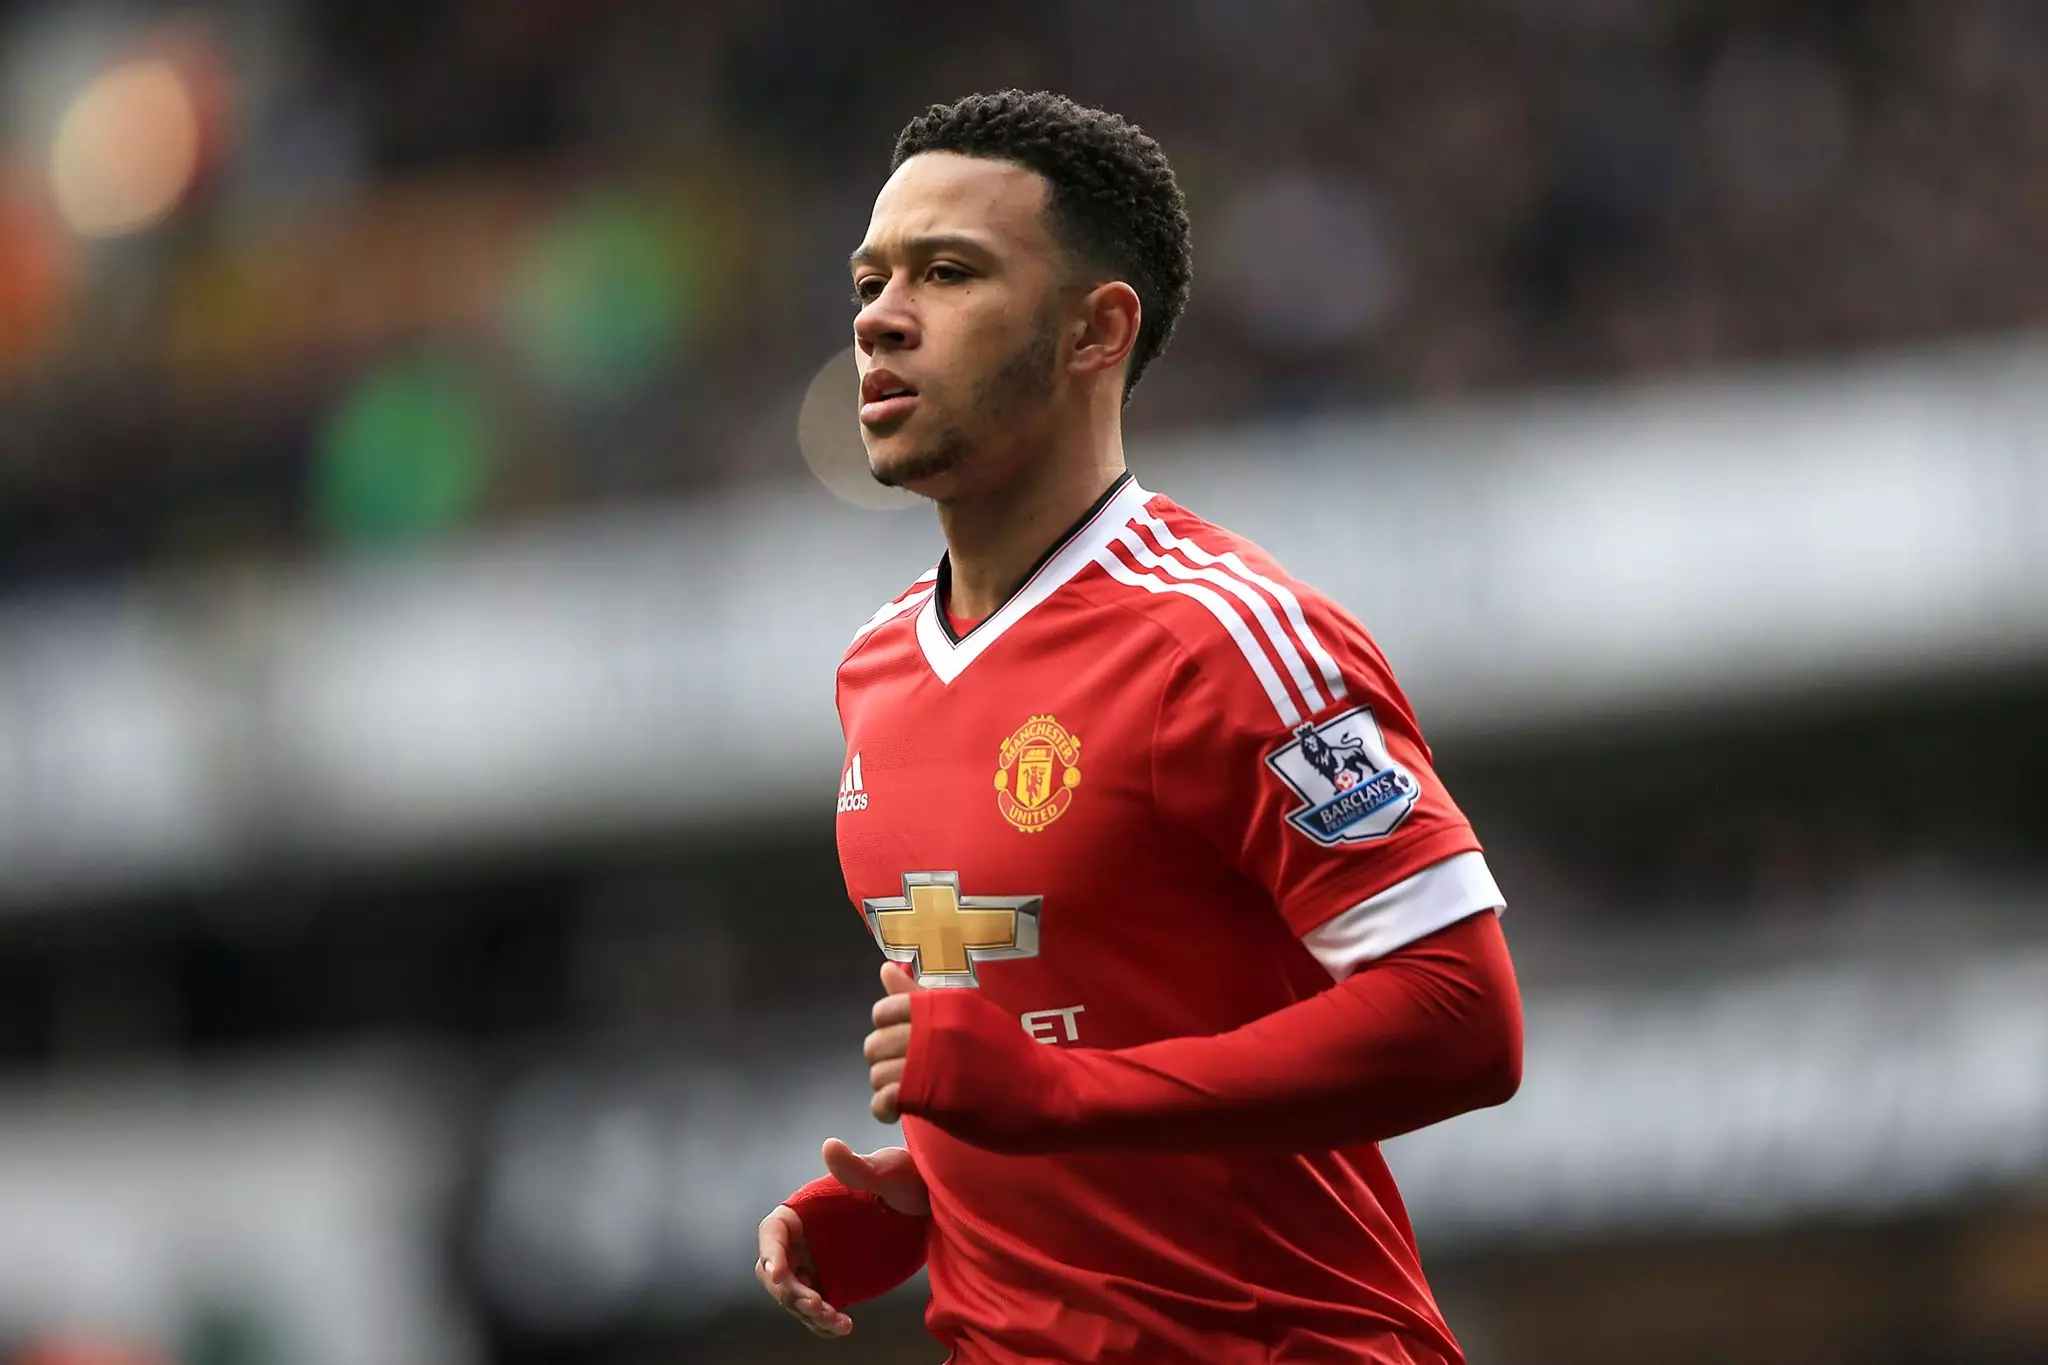 Depay could only show moments of brilliance for United. Image: PA Images